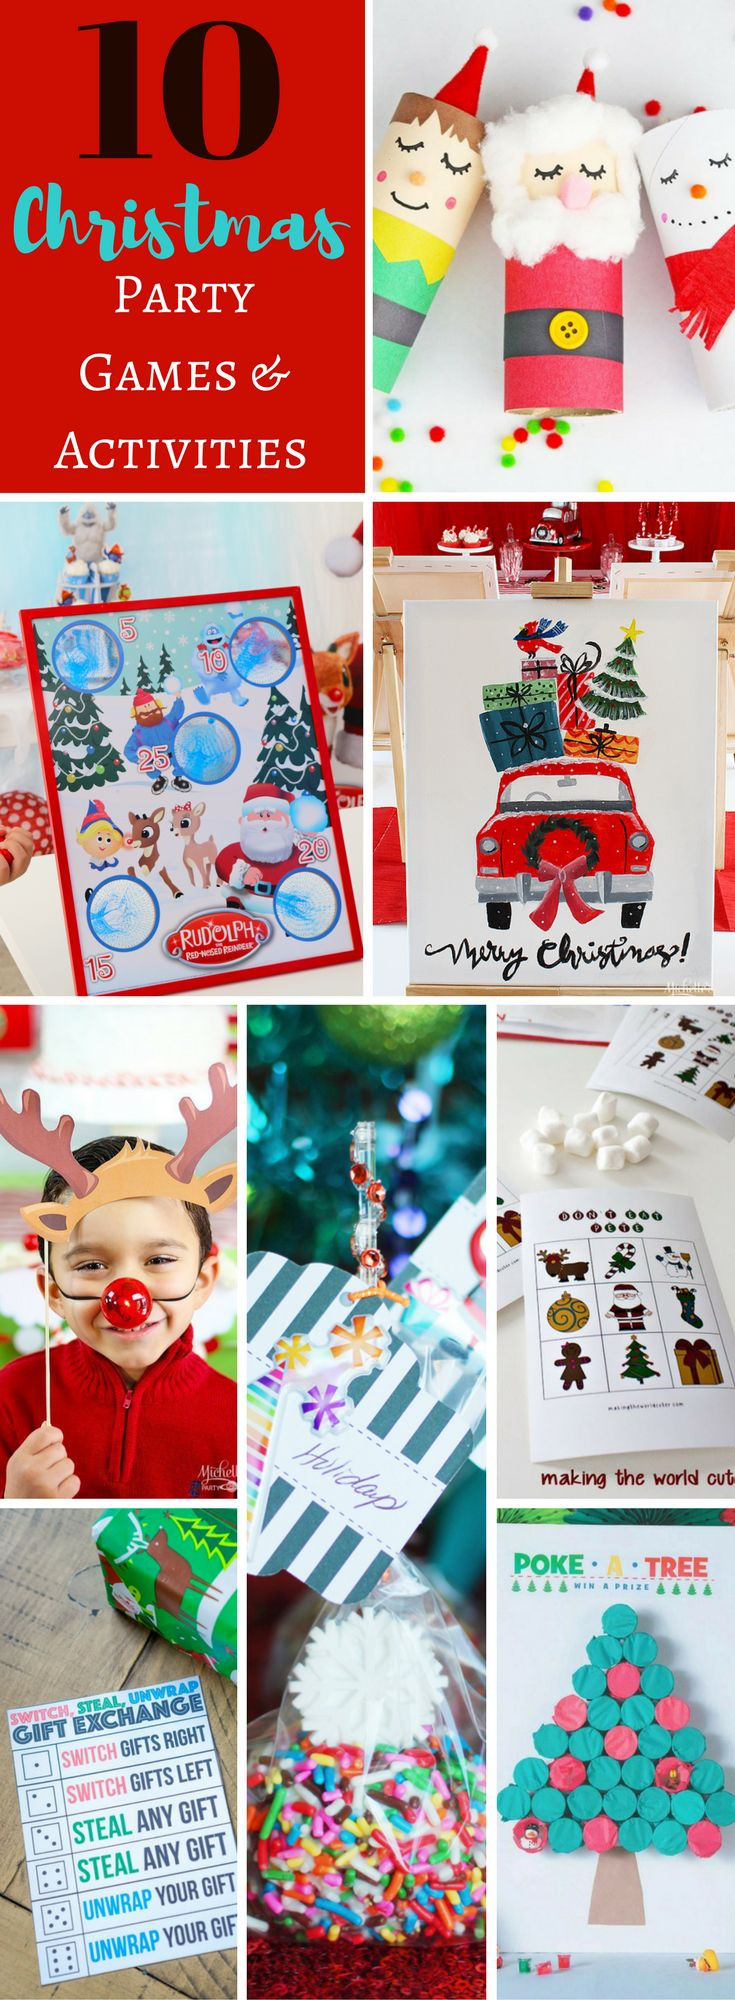 Work Holiday Party Game Ideas
 25 unique Christmas party games ideas on Pinterest